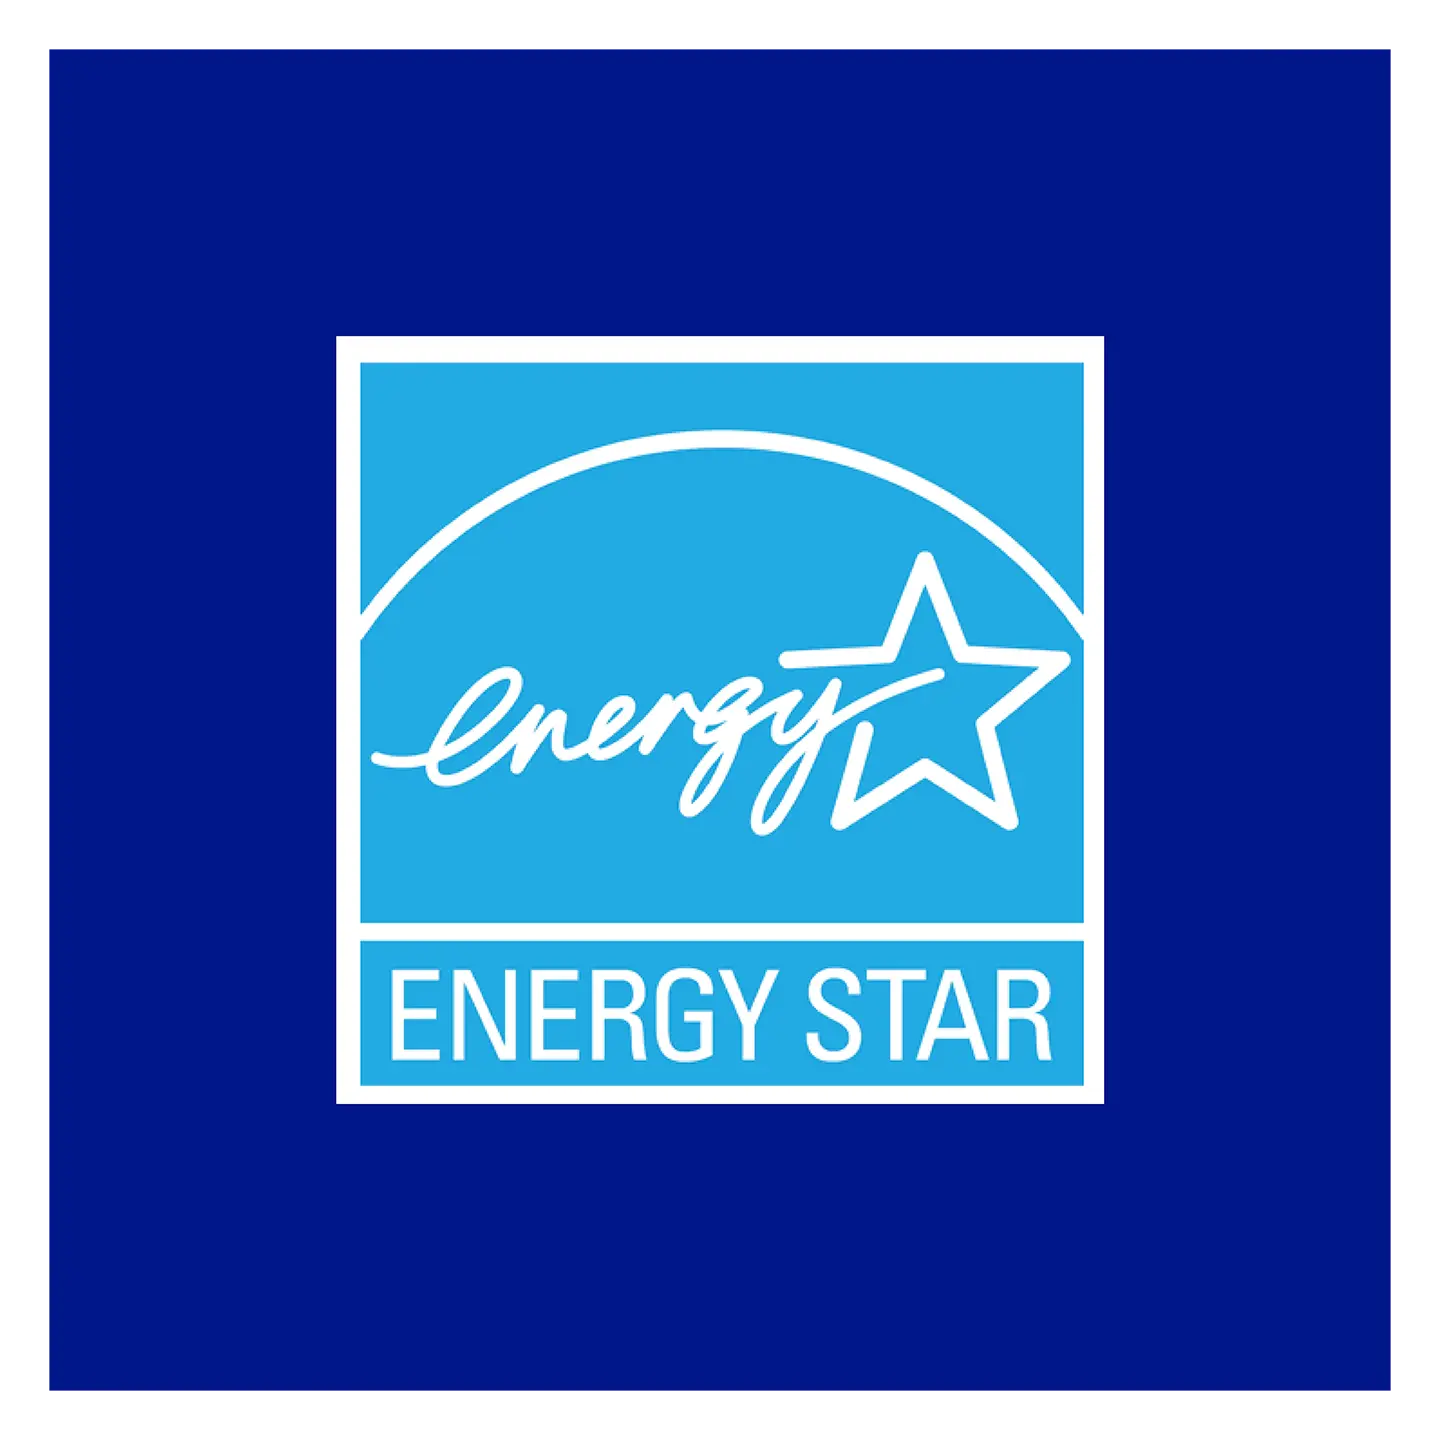 ENERGY STAR rated